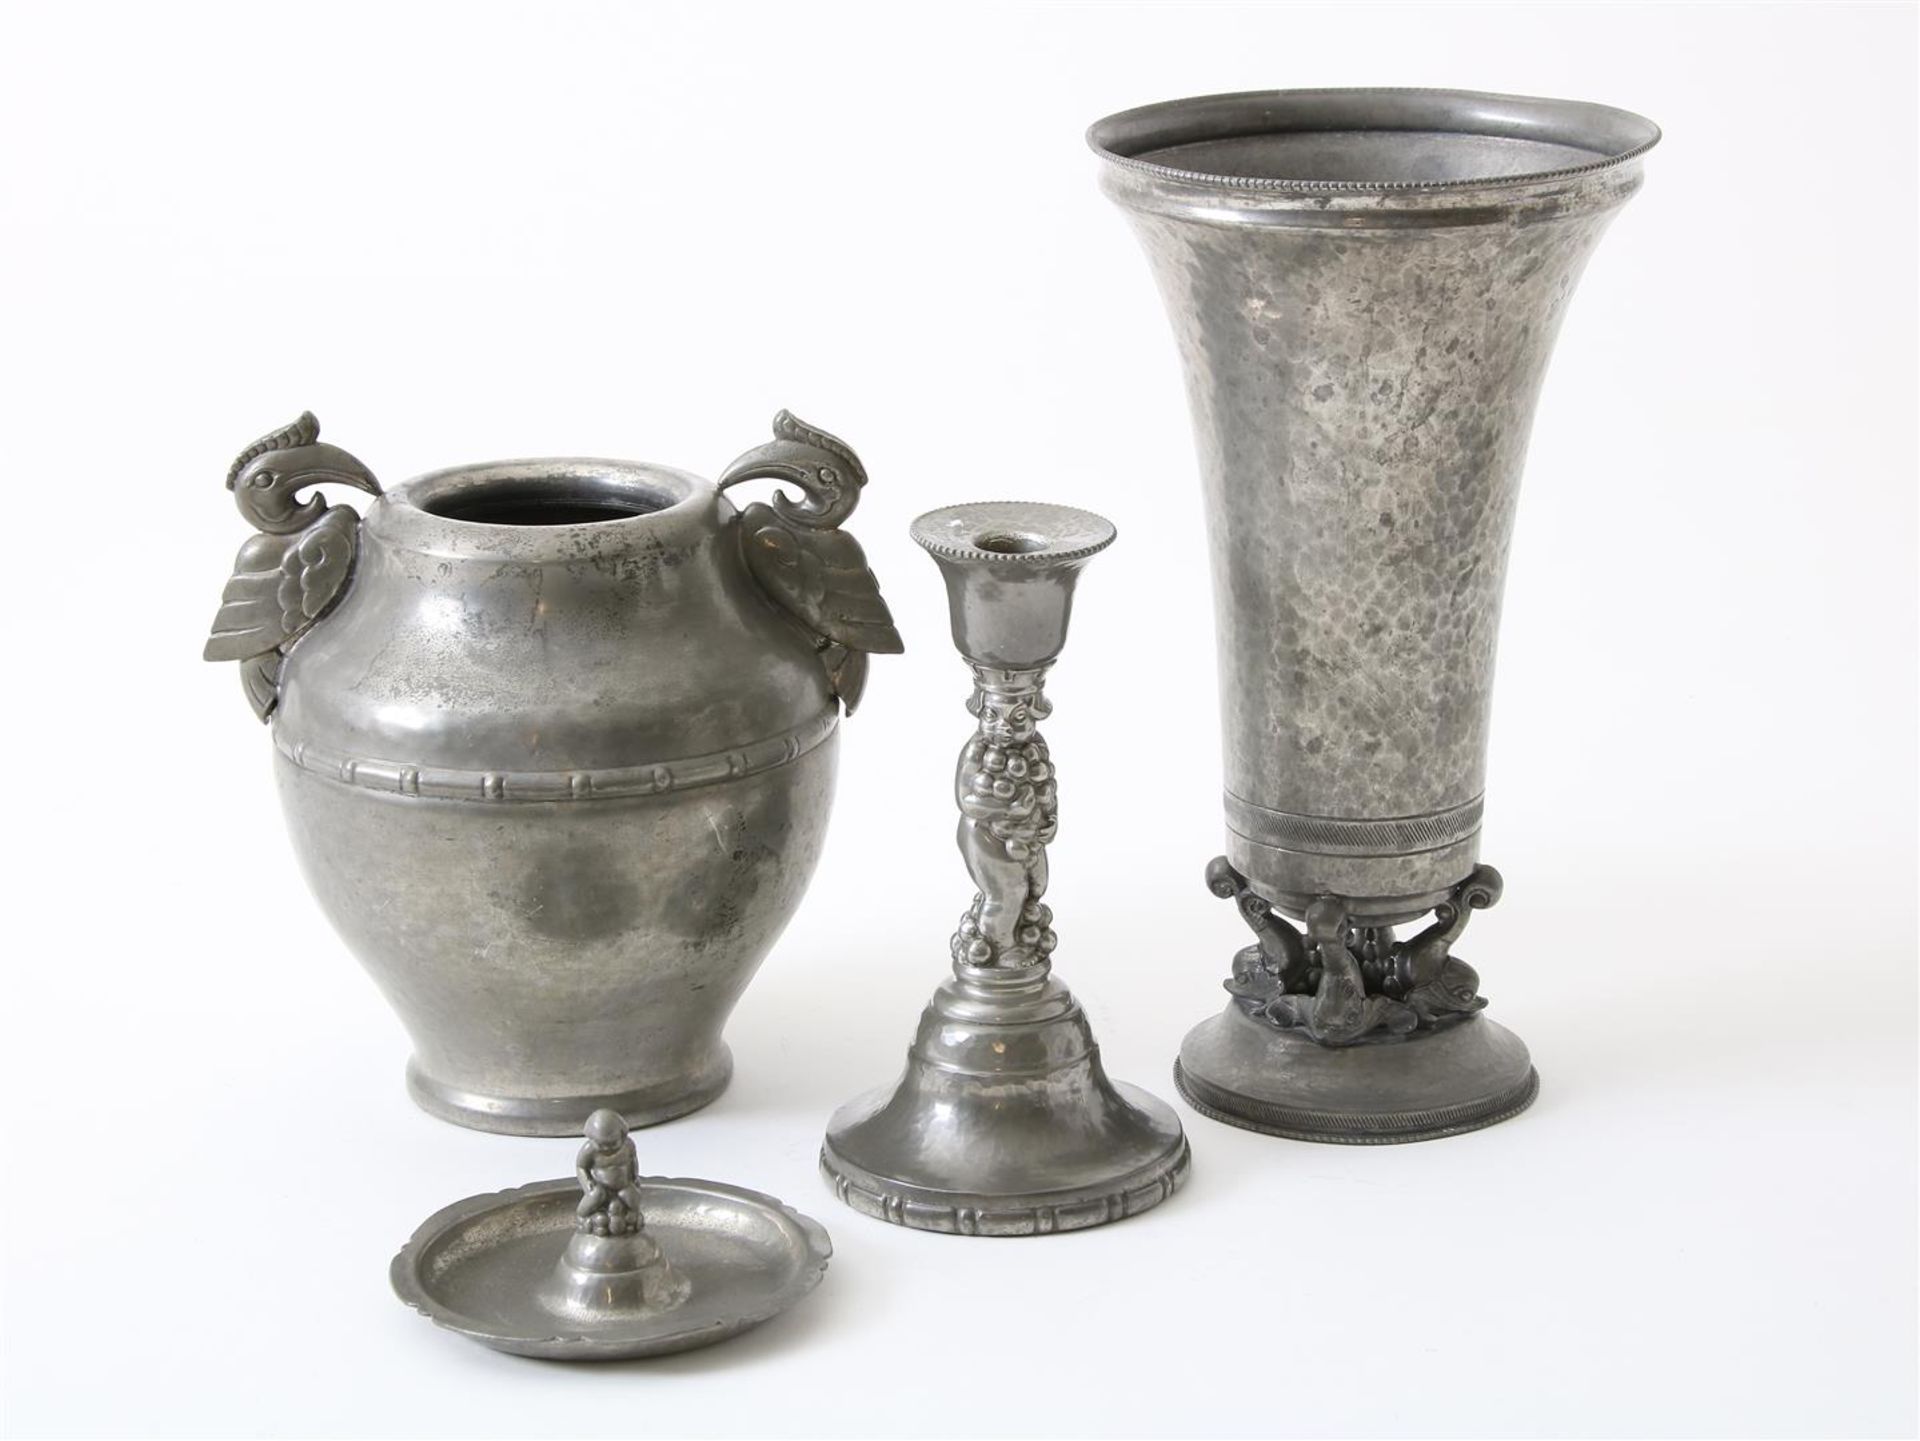 Lot of an Art Deco pewter vase on an openwork base, ashtray, candlestick and vase with Cockatoos,